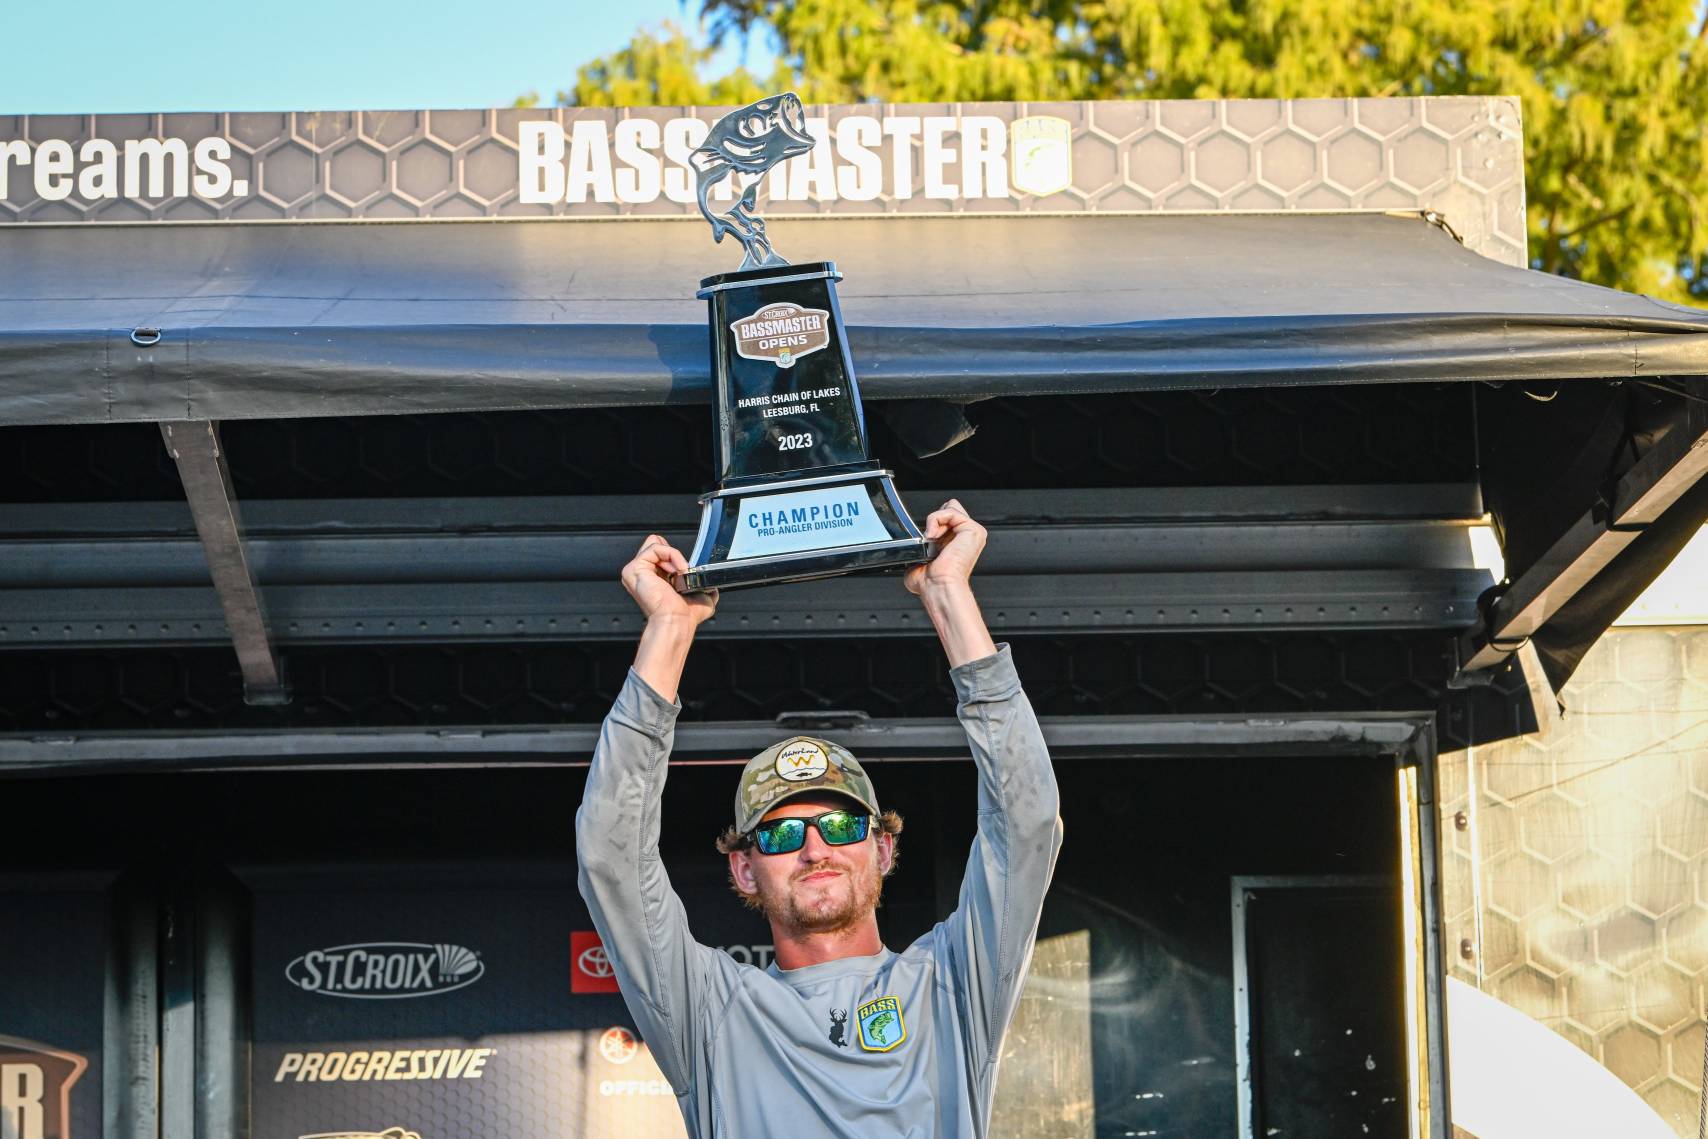 Messer Wins Bassmaster Open at Harris Chain of Lakes